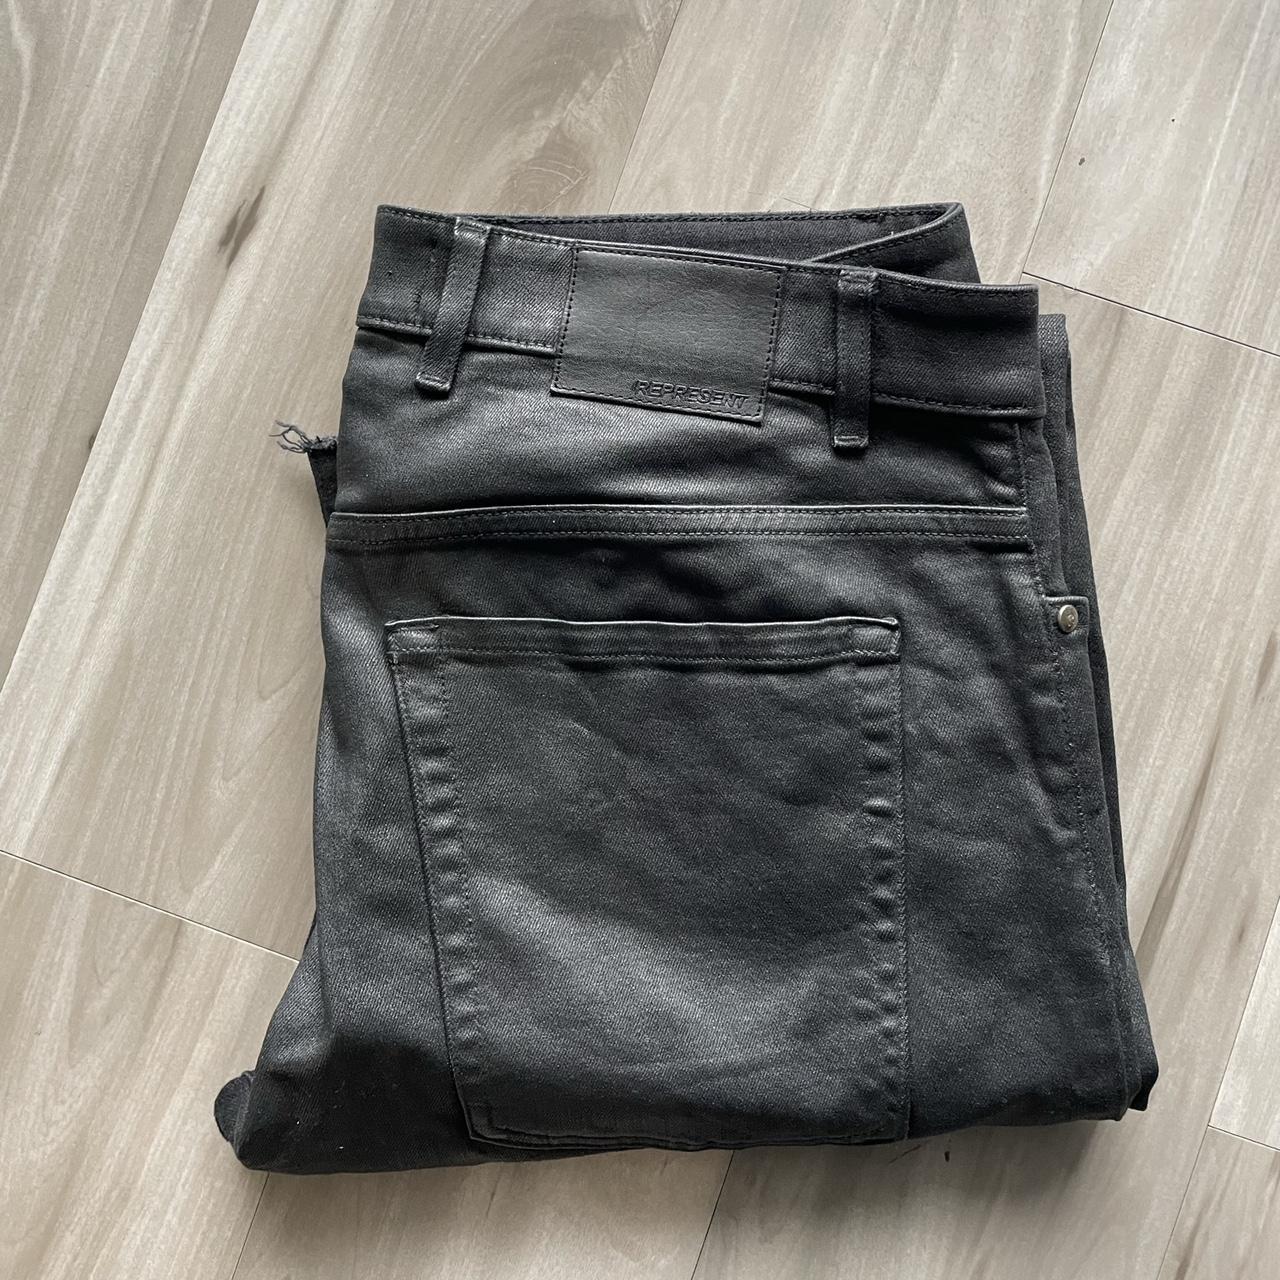 Represent Men's Black and Silver Trousers